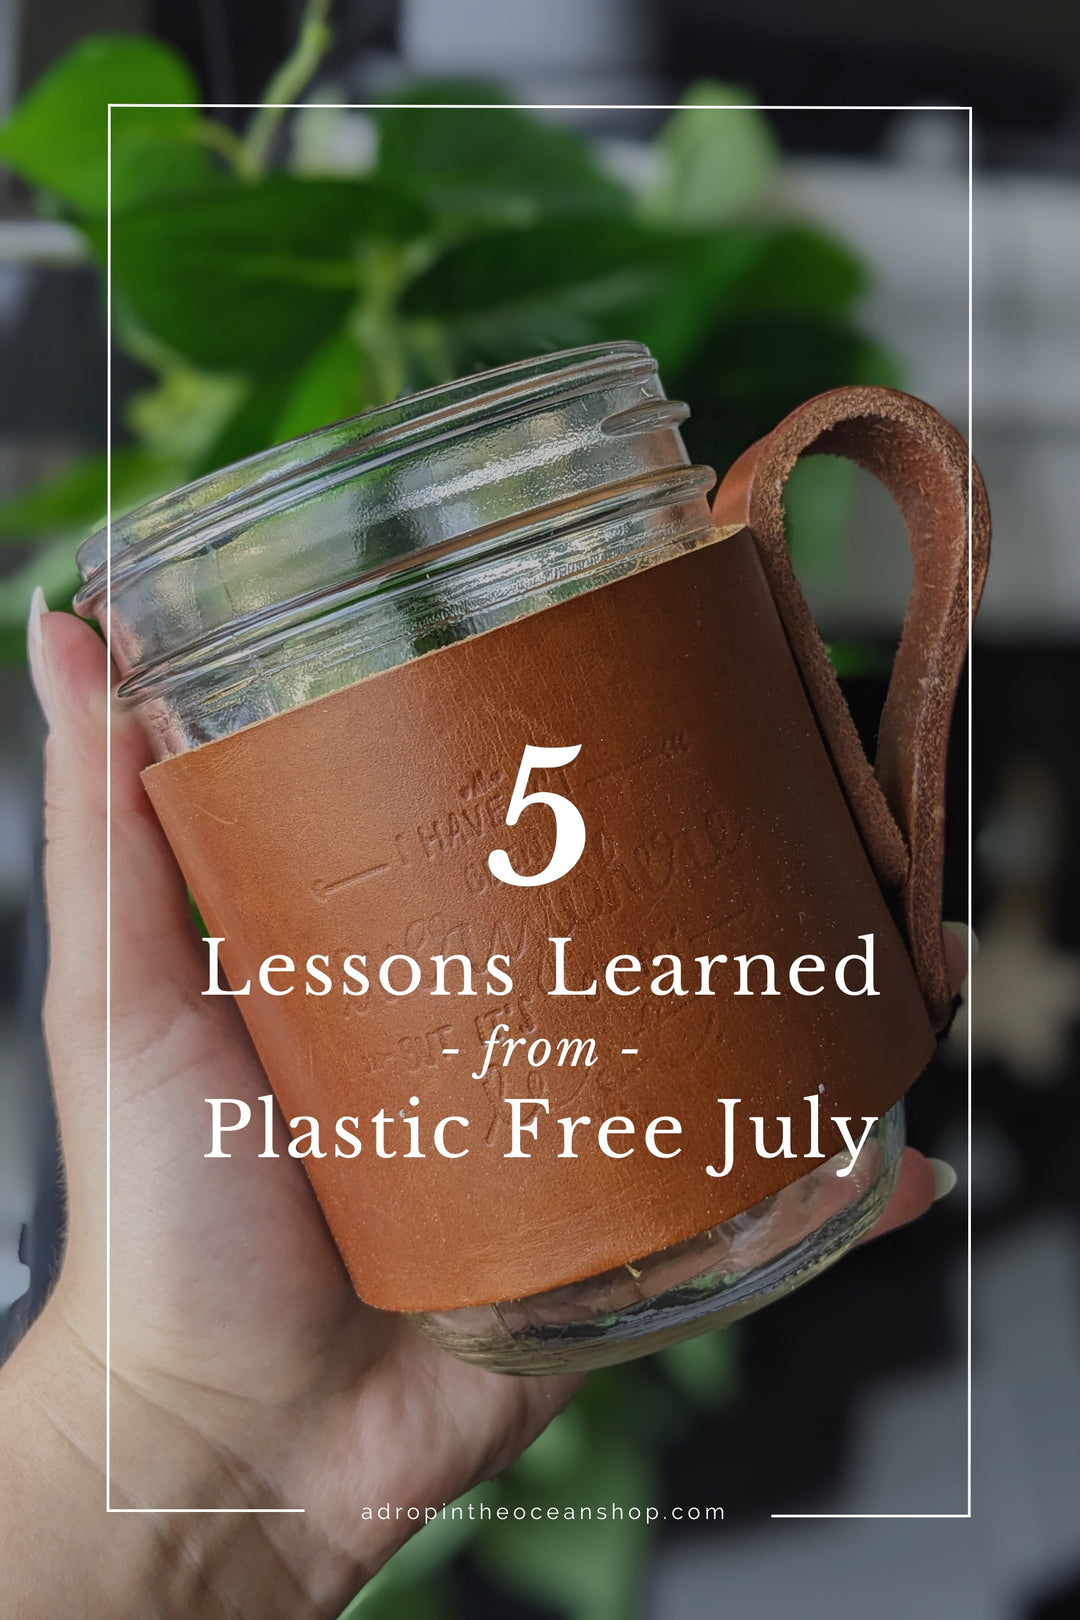 A Drop in the Ocean Zero Waste Store: 5 Lessons Learned from Plastic Free July